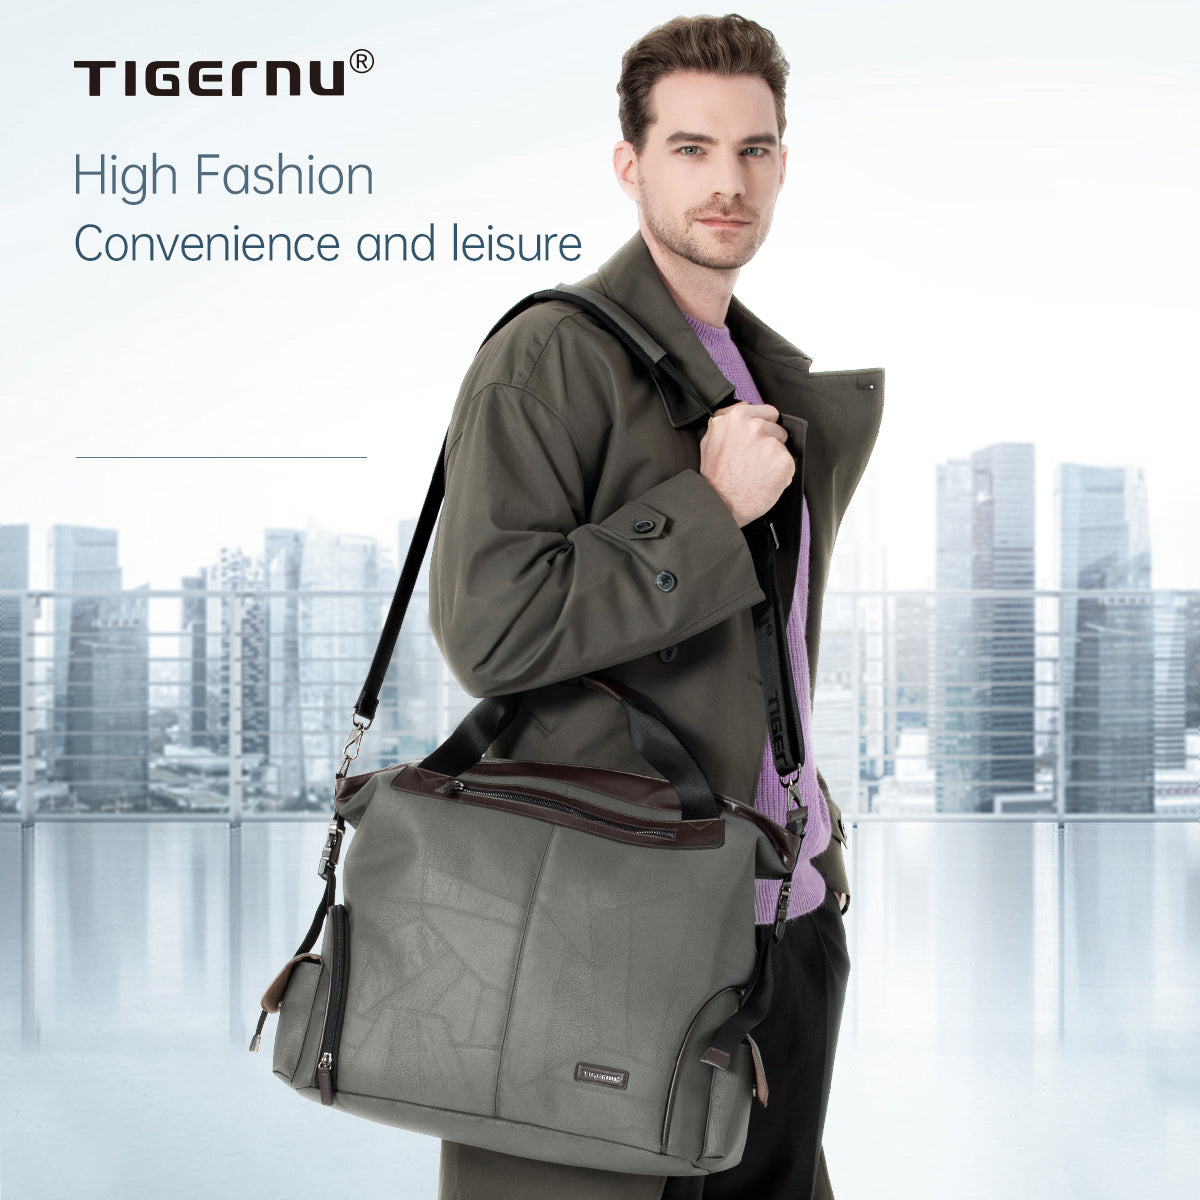 Tigernu T-N1030 splash-proof larger capacity shoes casual travel bag men luggage for outdoor